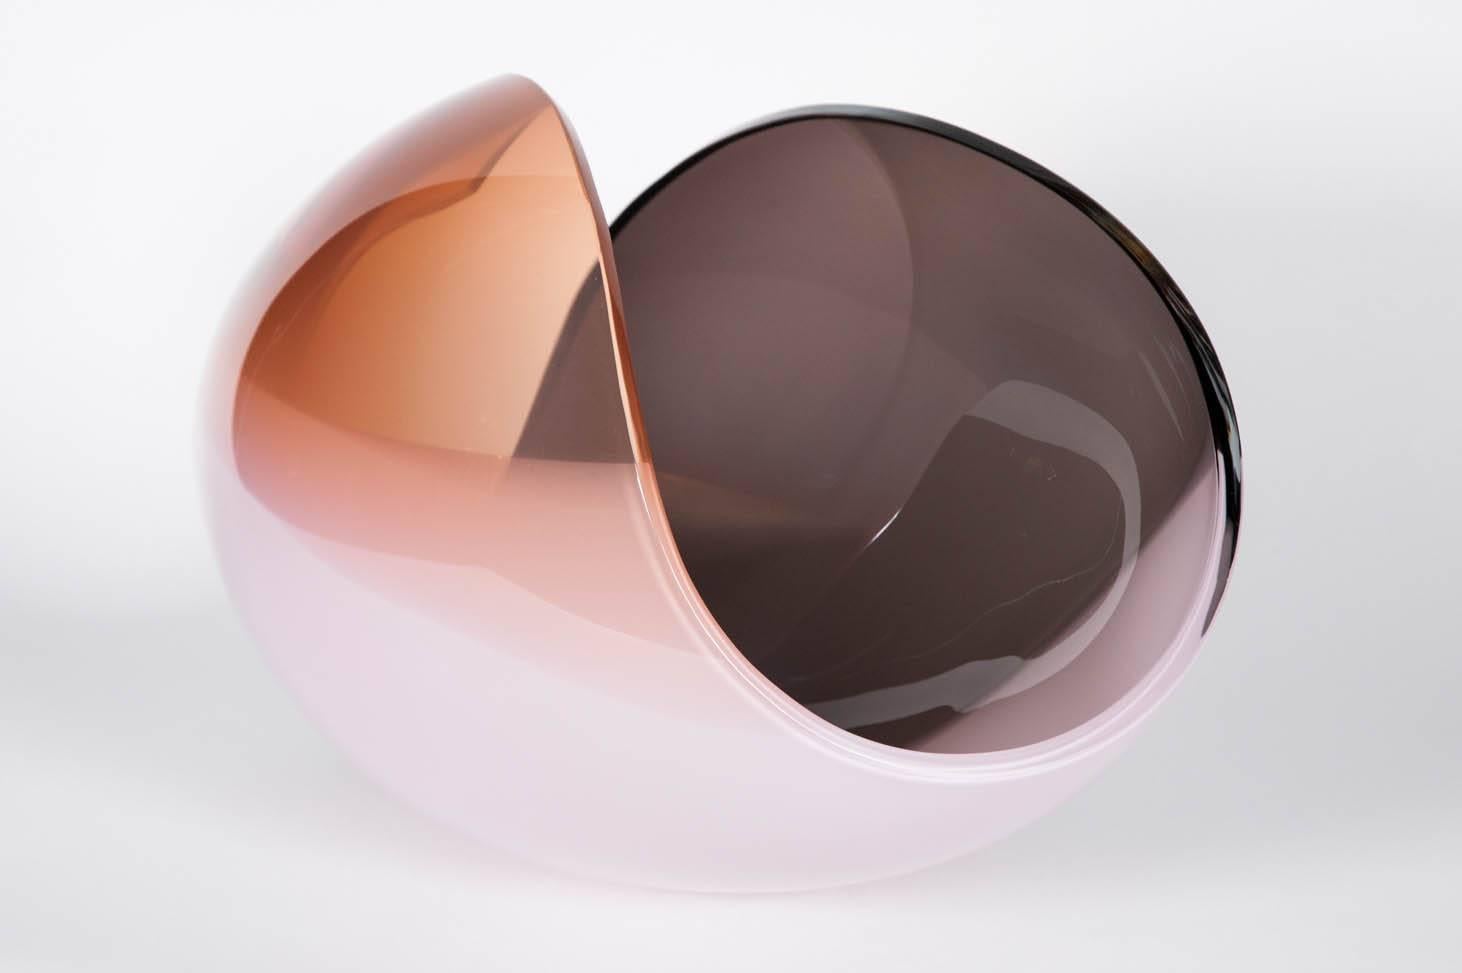 Focus and elegance; dramatic sharp graphic shapes; fluid and sensuous curves - just some of the words that spring to mind when looking at the work of Lena Bergström. Vessel is proud to represent the work of this Swedish star, whose designs are as